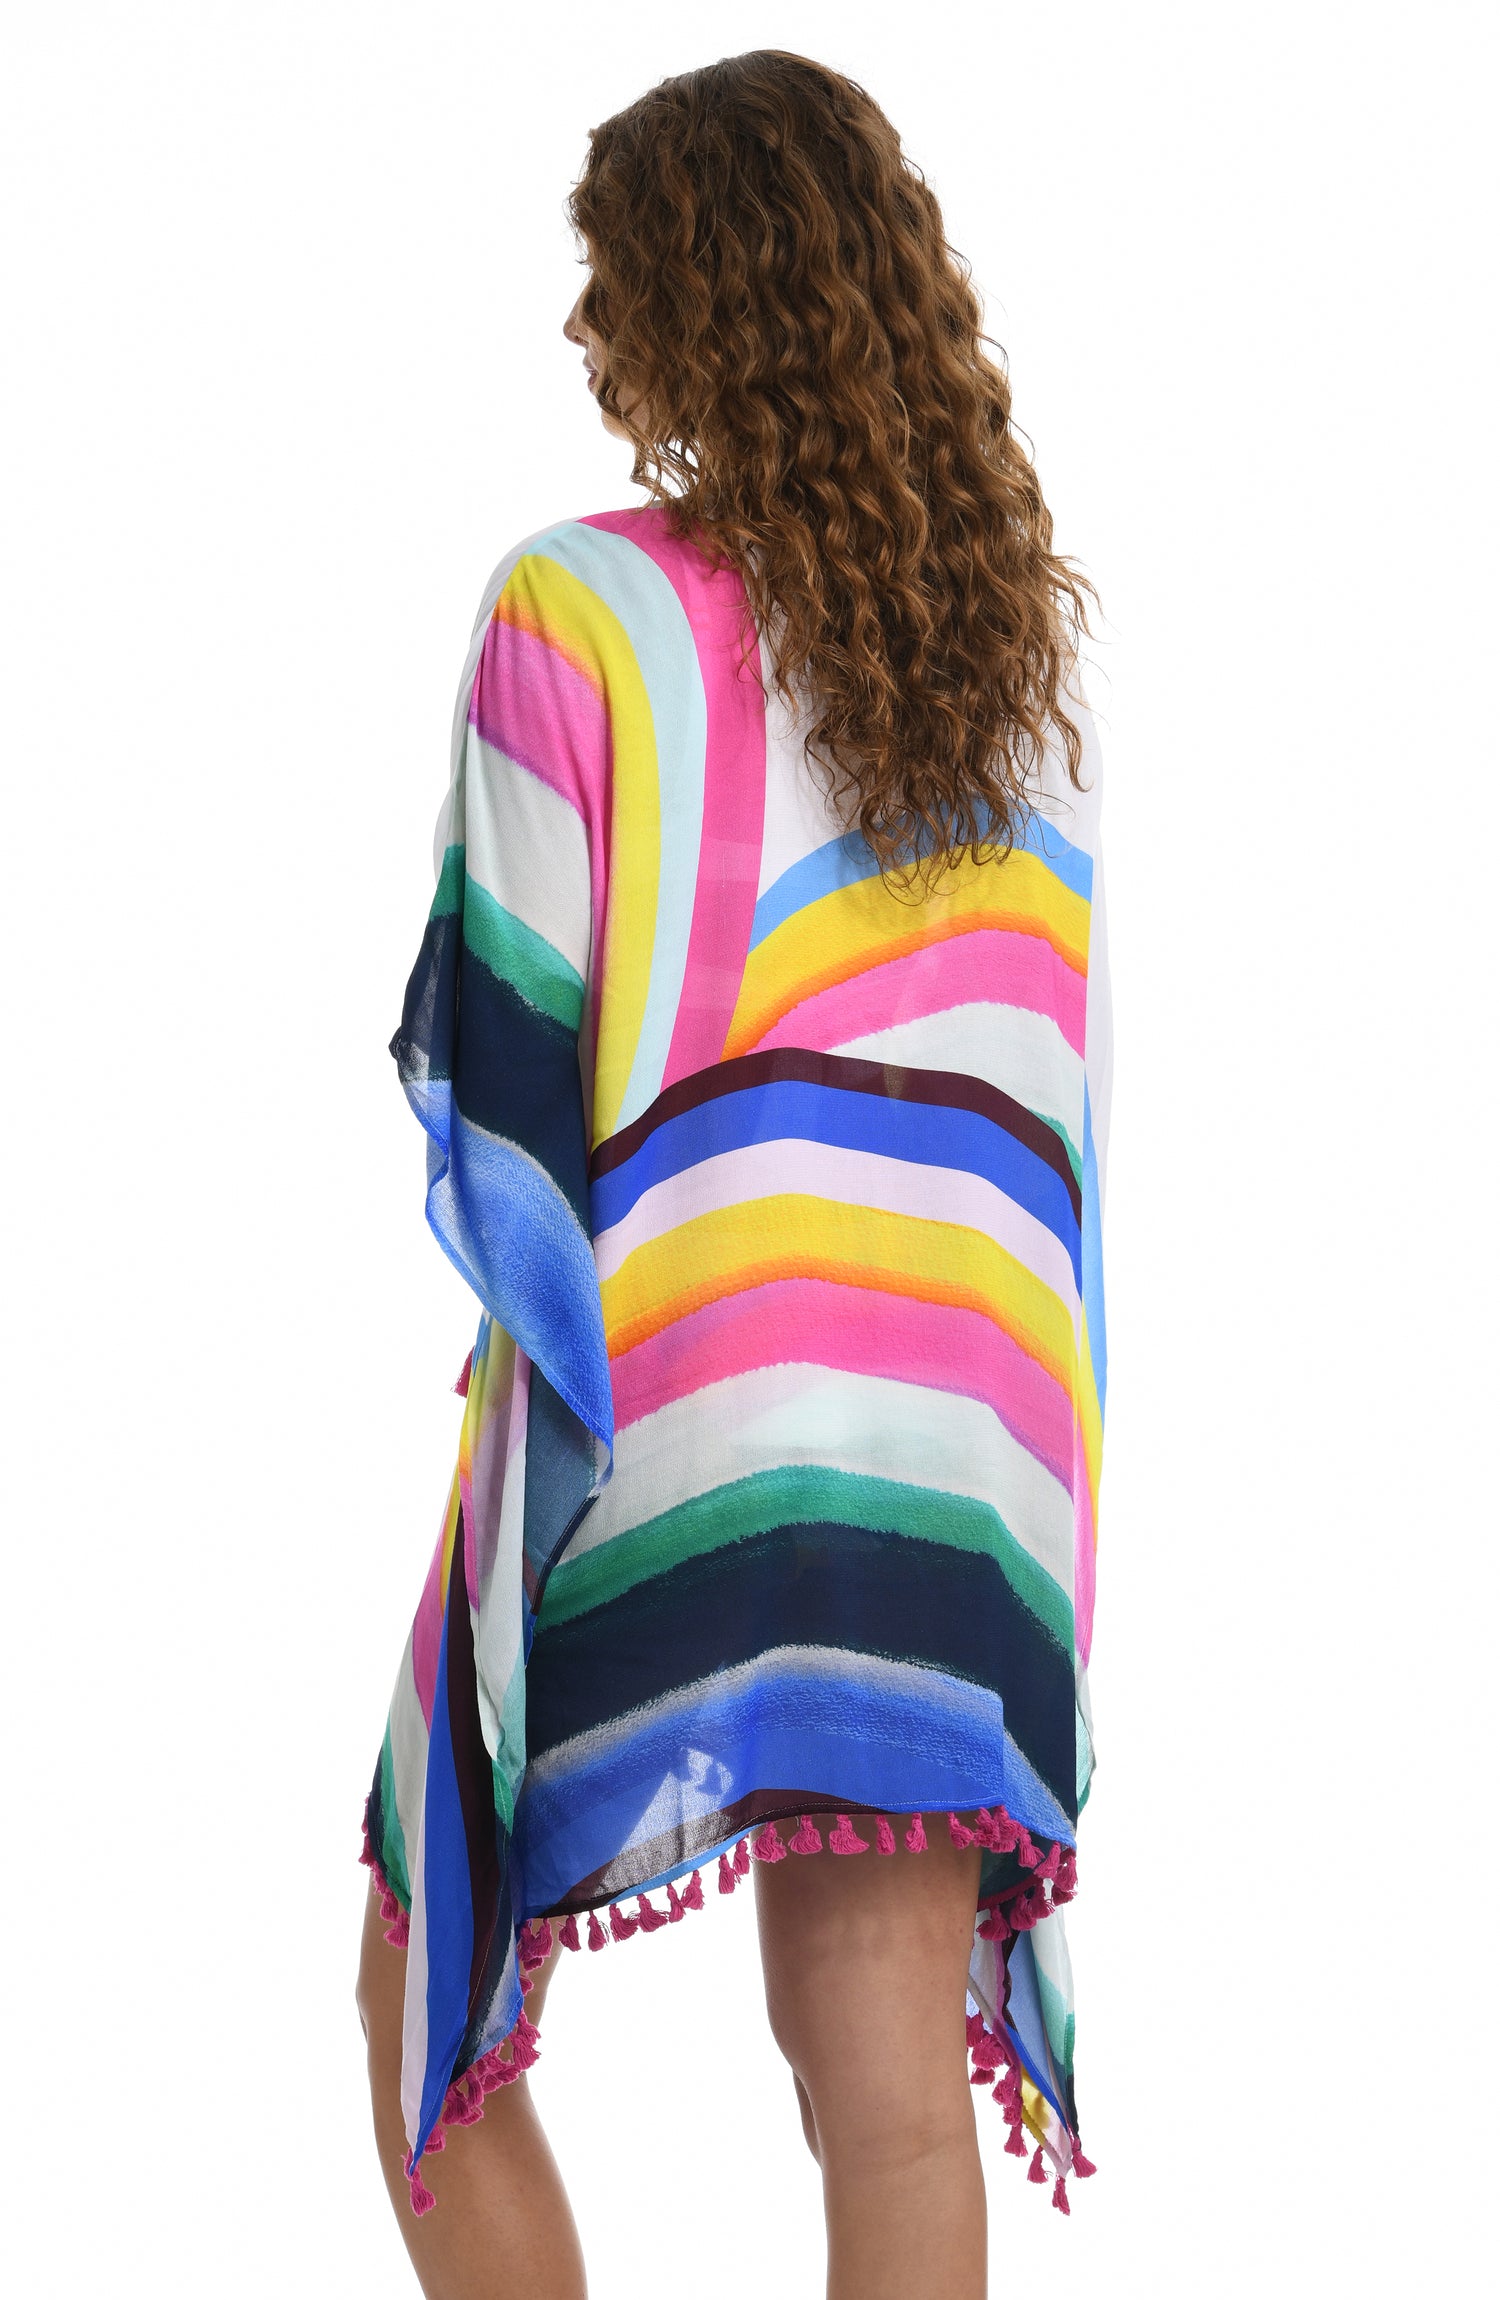 Model is wearing a white v-neck tunic swimsuit cover up with a vibrant rainbow striped print from our Retro Rainbow collection.